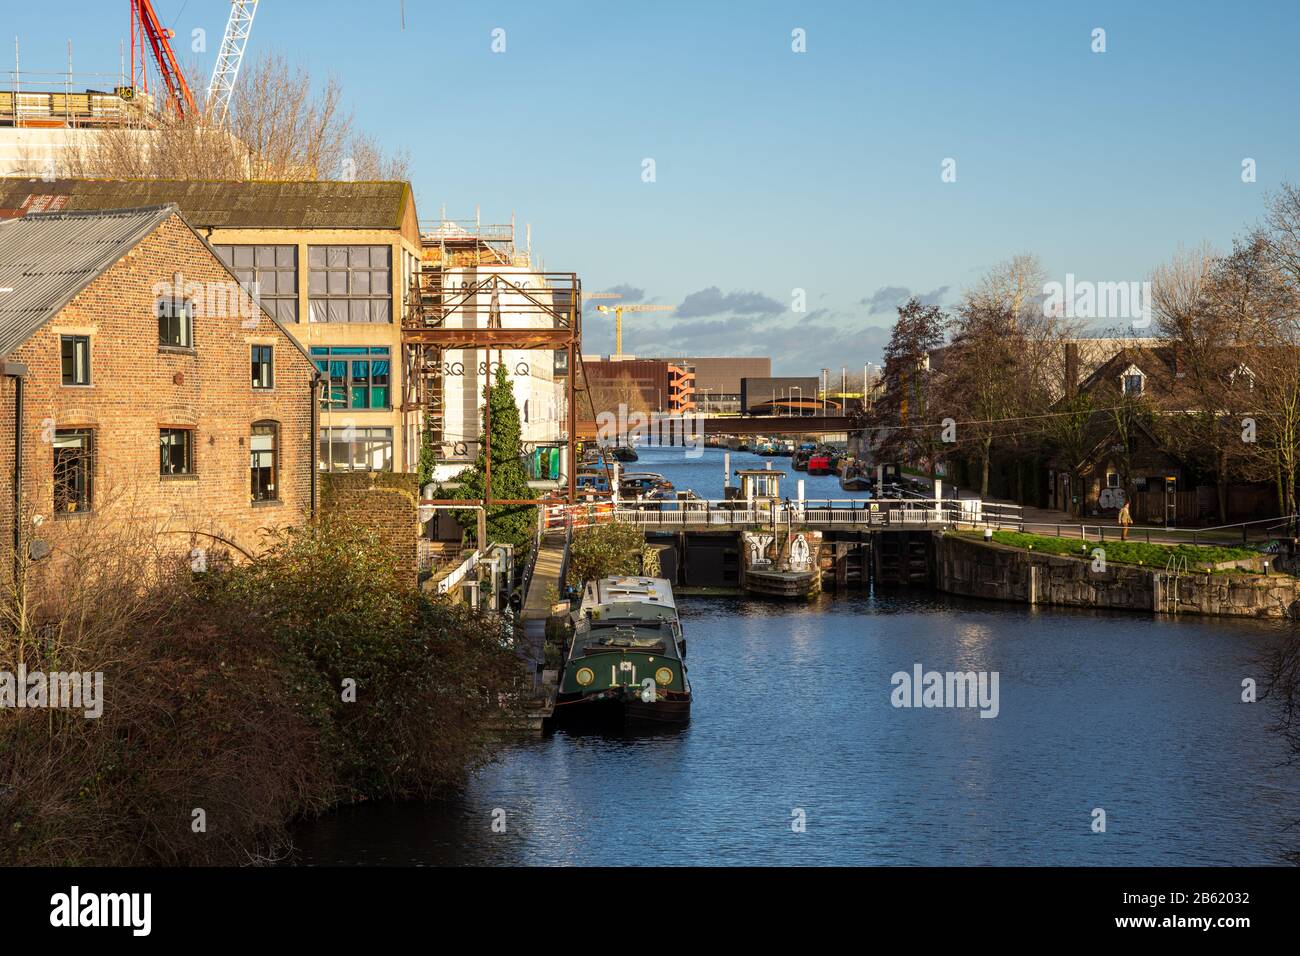 London, England, UK - January 9, 2020: Narrowboats are moored in the River Lea Navigation at Old Ford Locks, beside the regenerating Fish Island and O Stock Photo